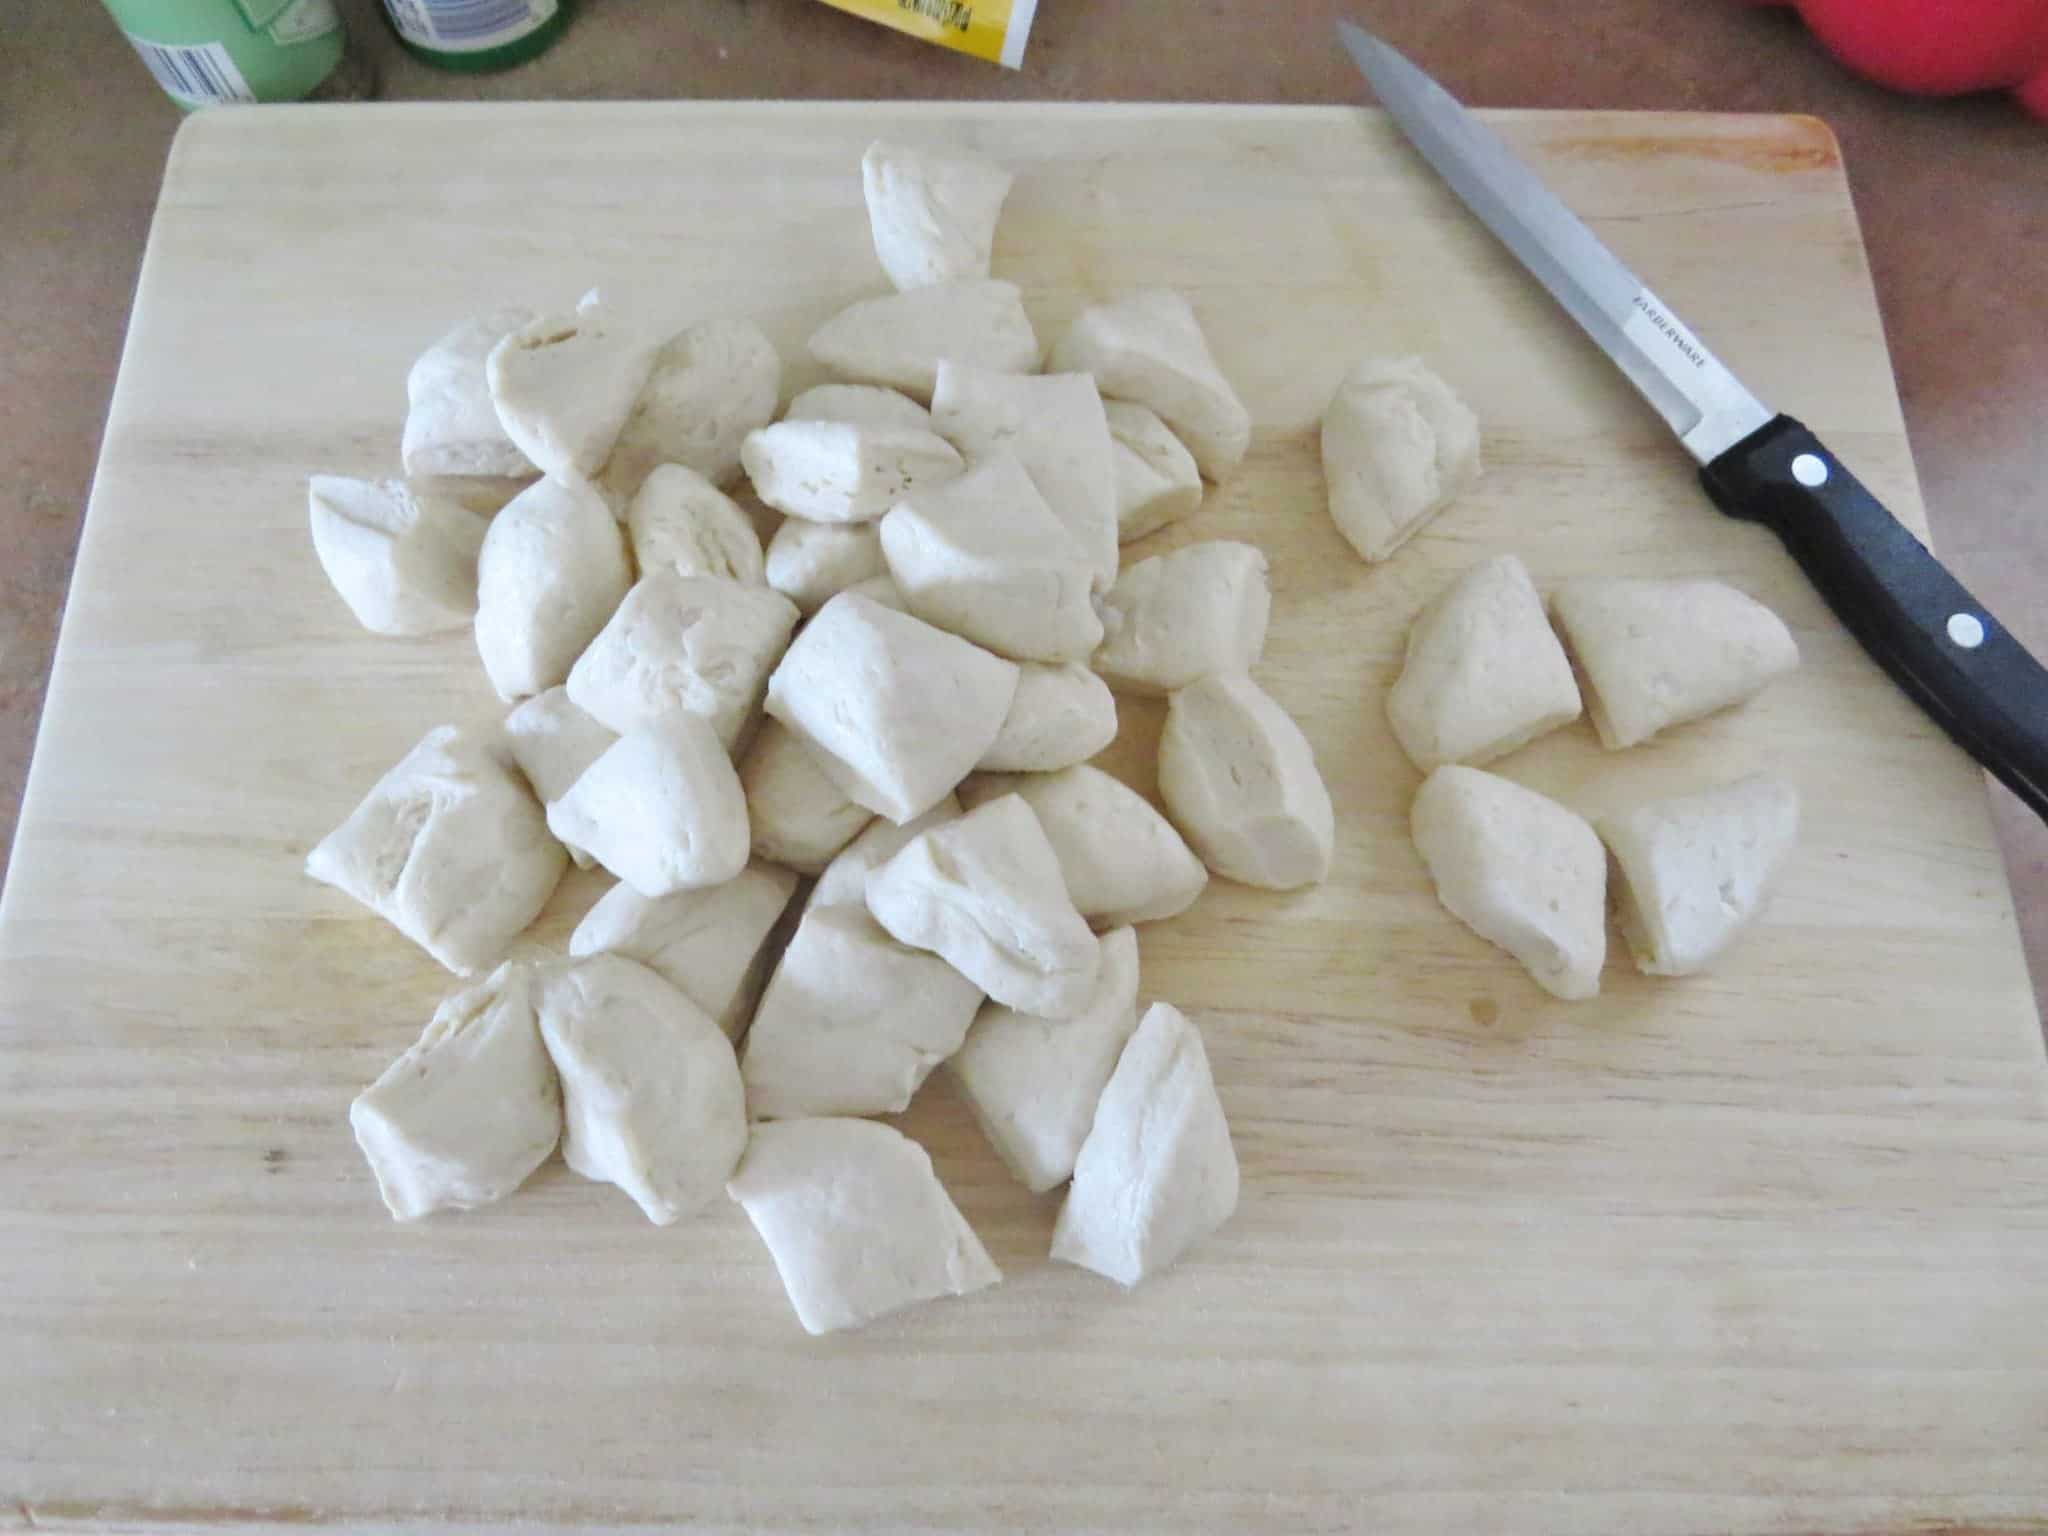 cut refrigerated Pillsbury biscuits on a wooden cutting board.